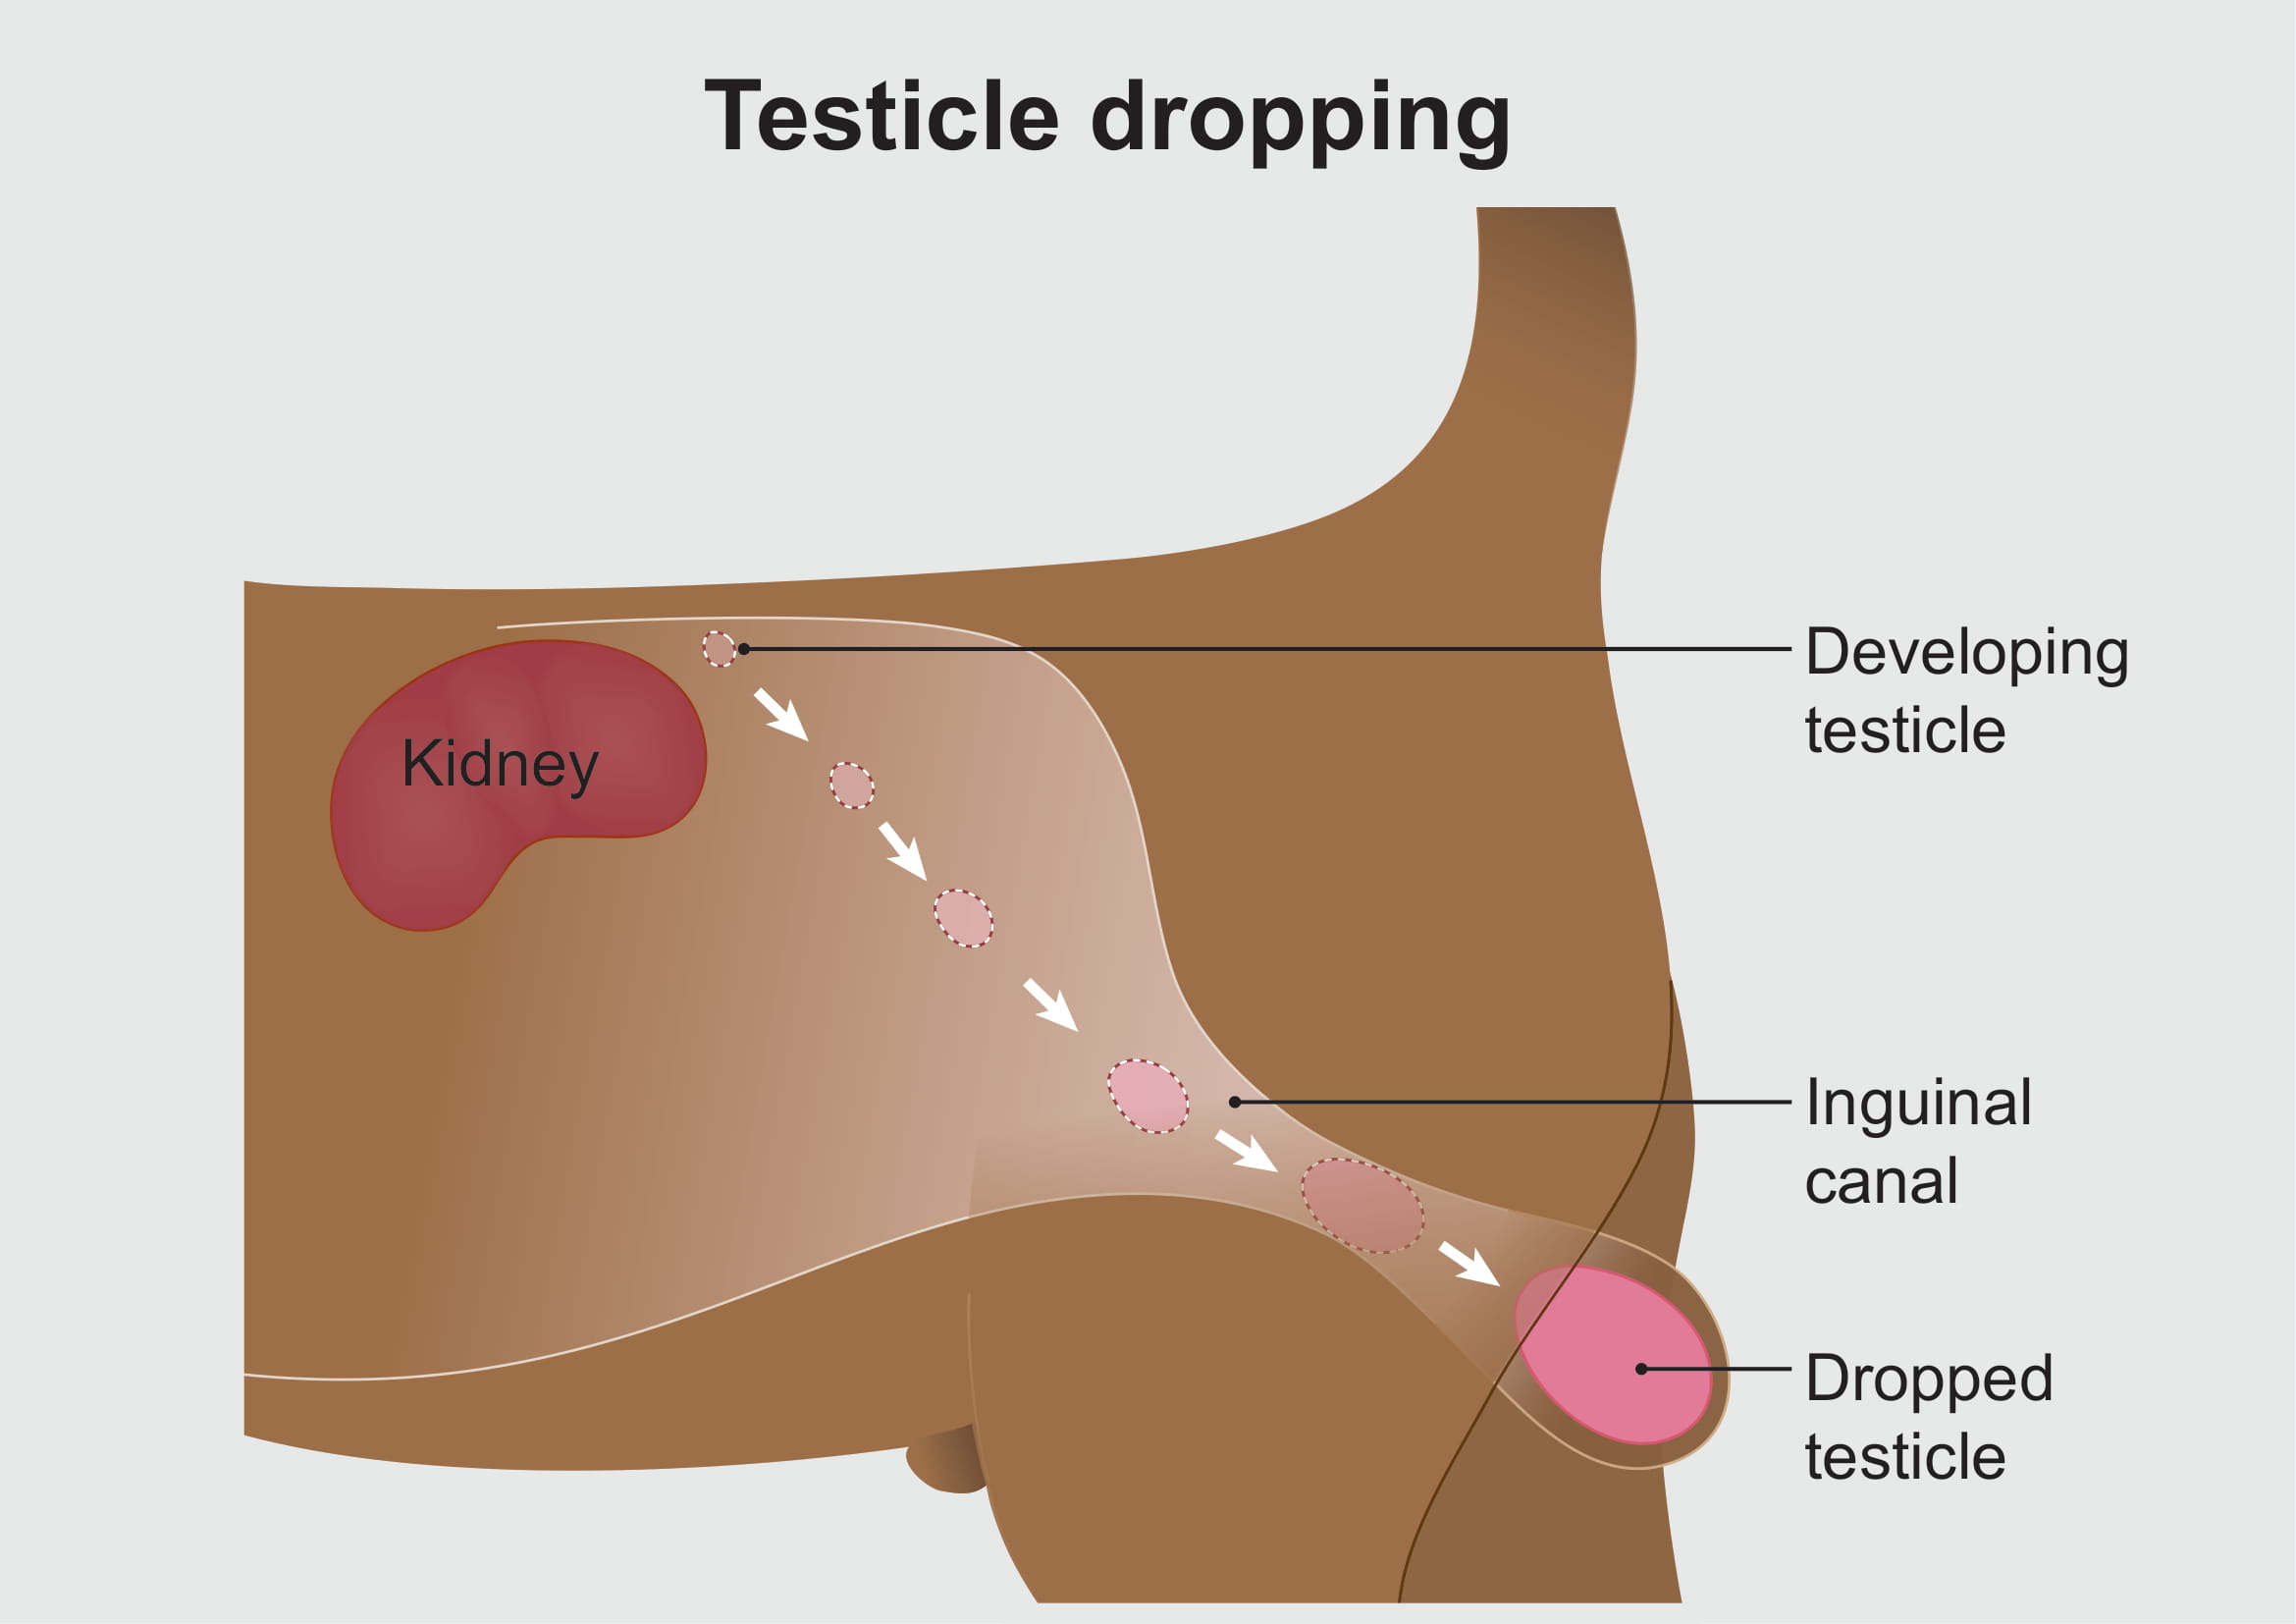 Look like testicle what does one disappearing of